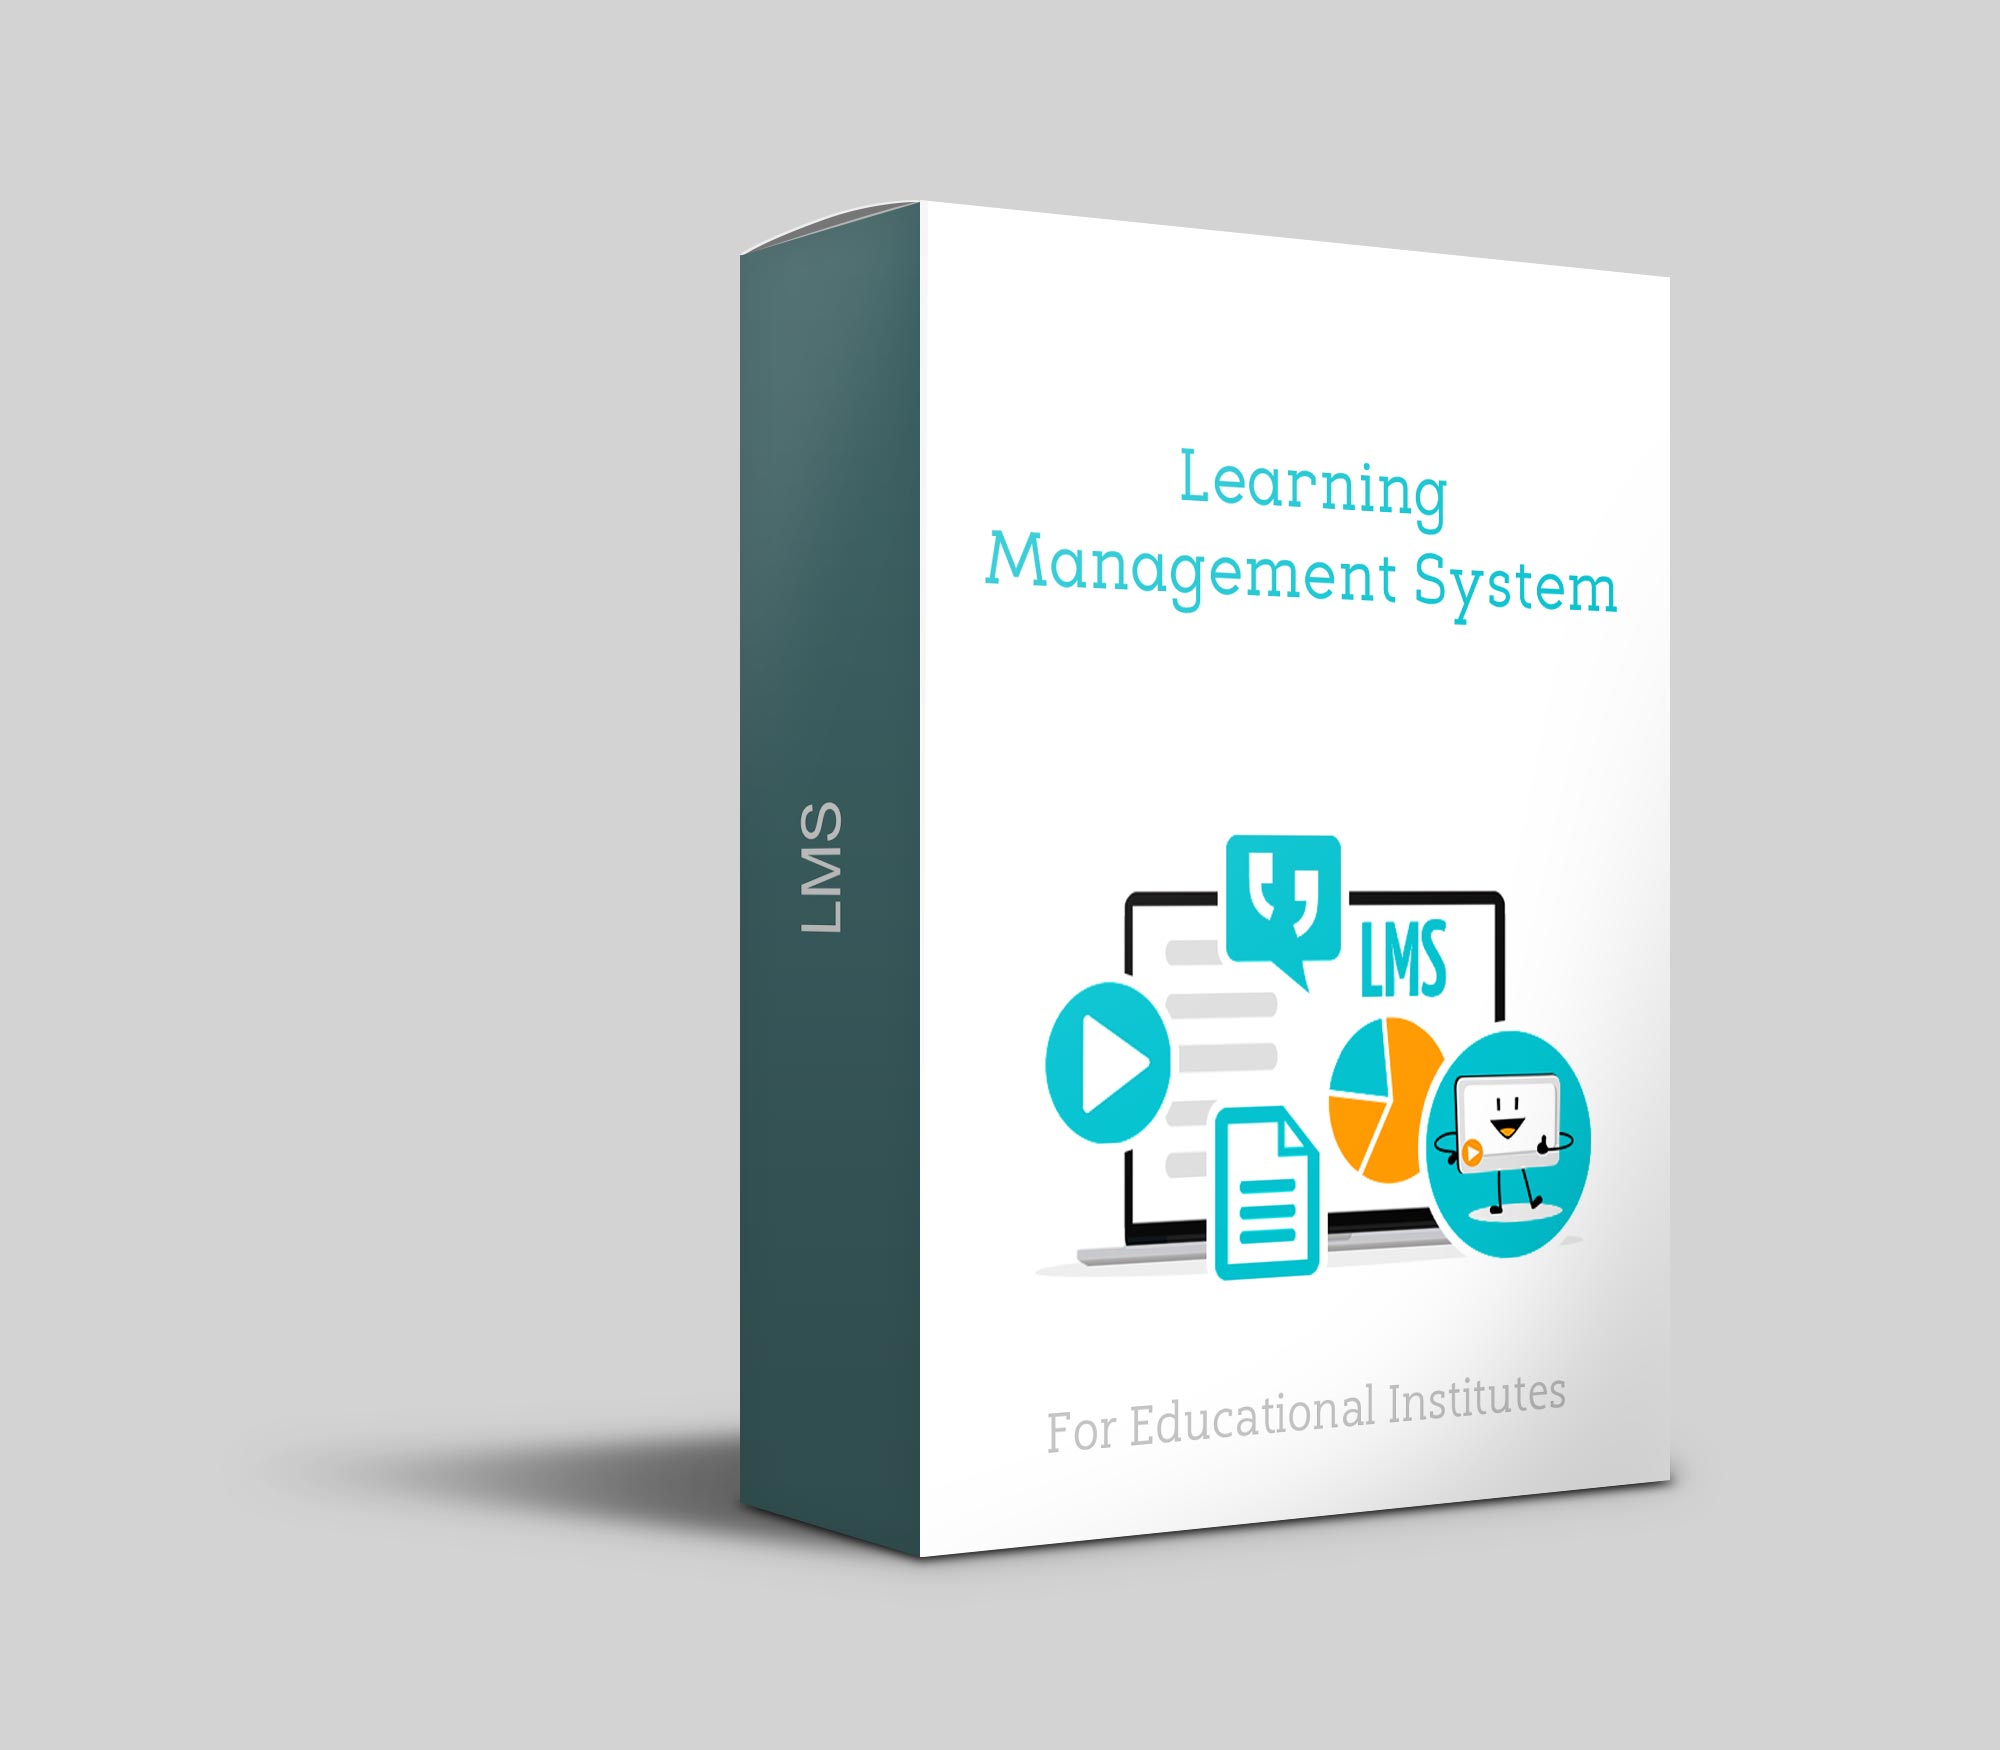 LMS - Learning Management Software